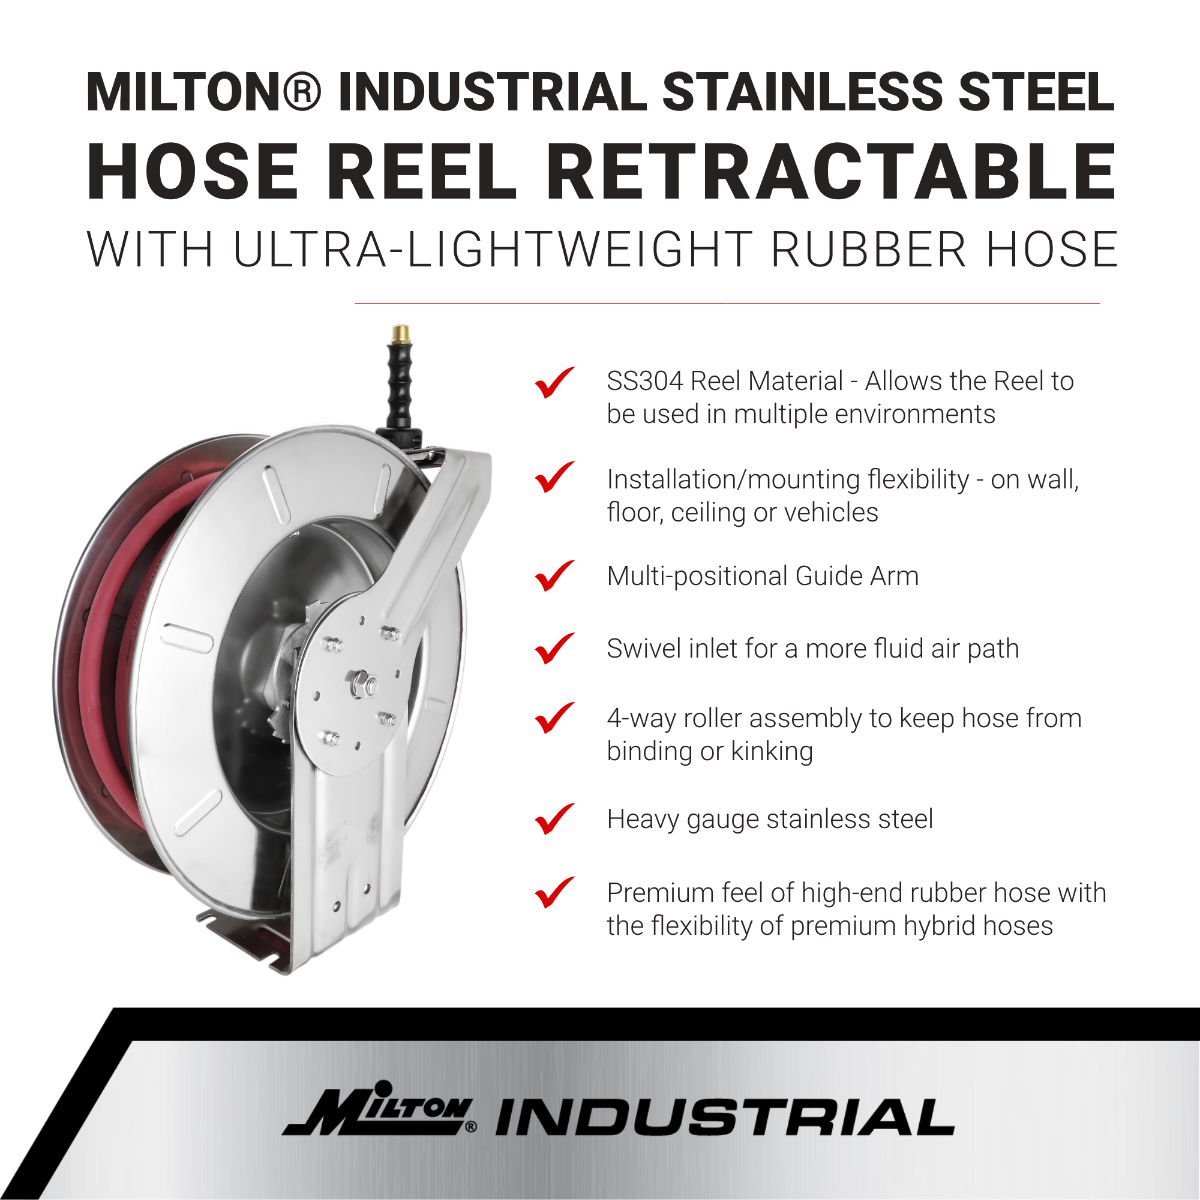 Milton Stainless Steel Hose Reel Retractable, 1/2 ID x 50' Ultra